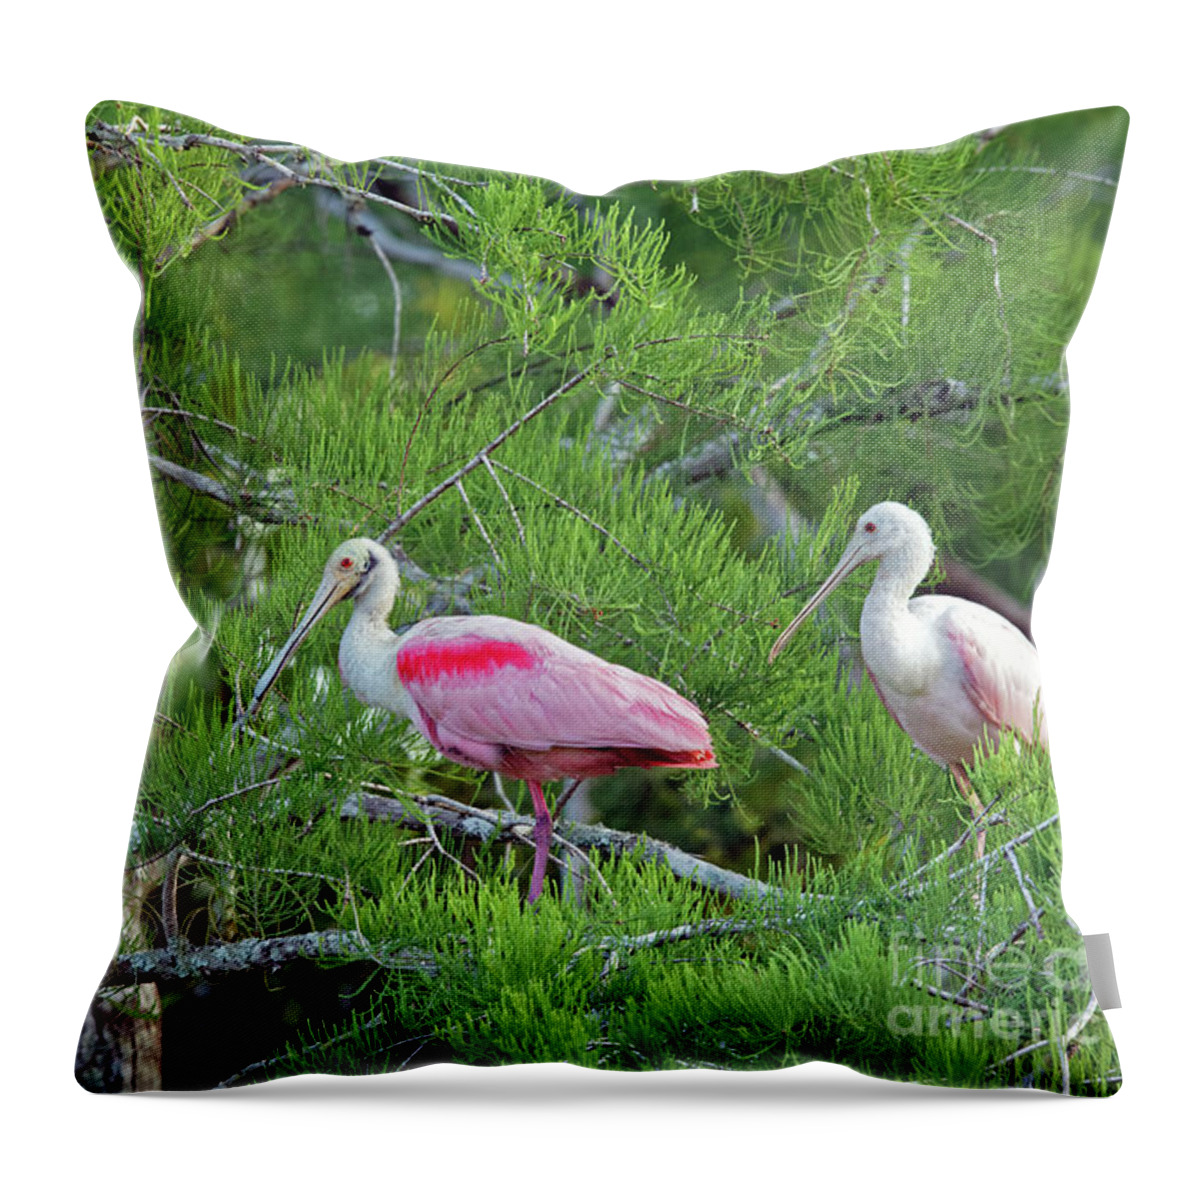 Cypress Tree Throw Pillow featuring the photograph Cypress Tree Spoonbills by Natural Focal Point Photography